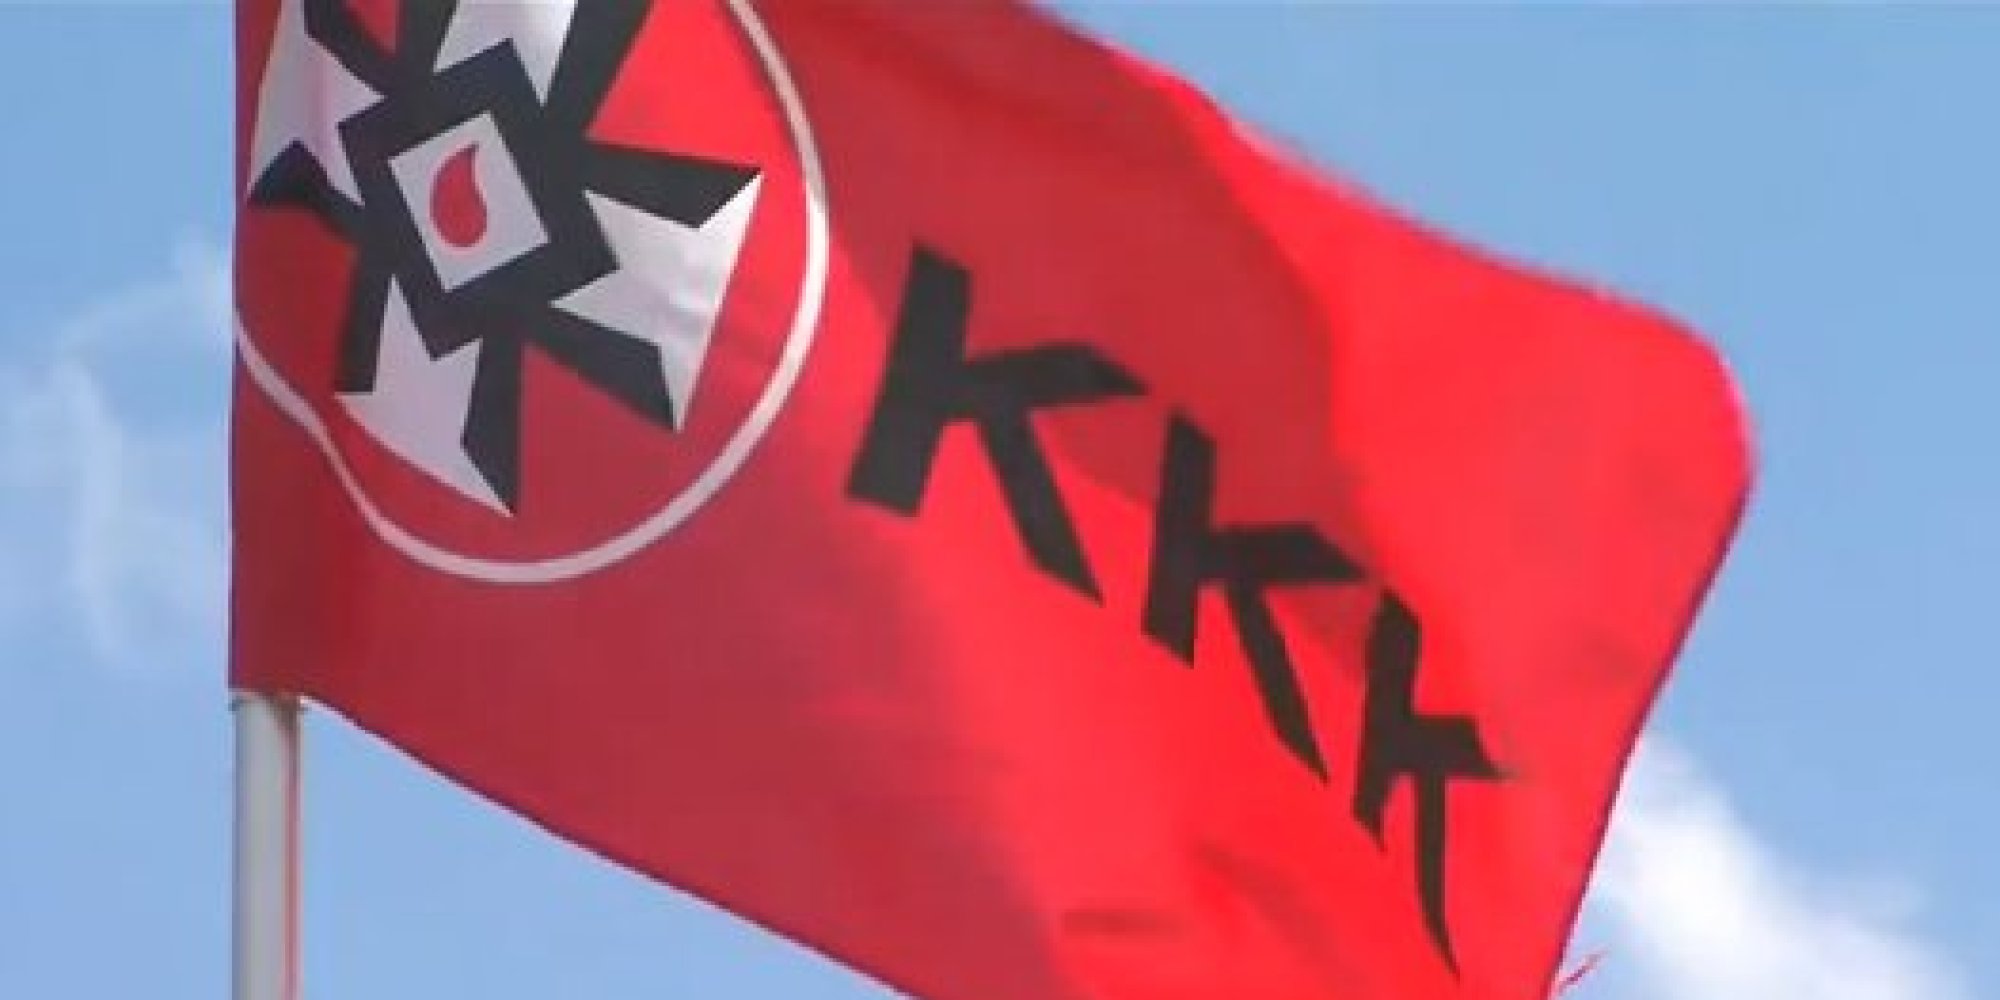 Florida Man Causes Stir With KKK Flag, 'Members Wanted' Sign On His